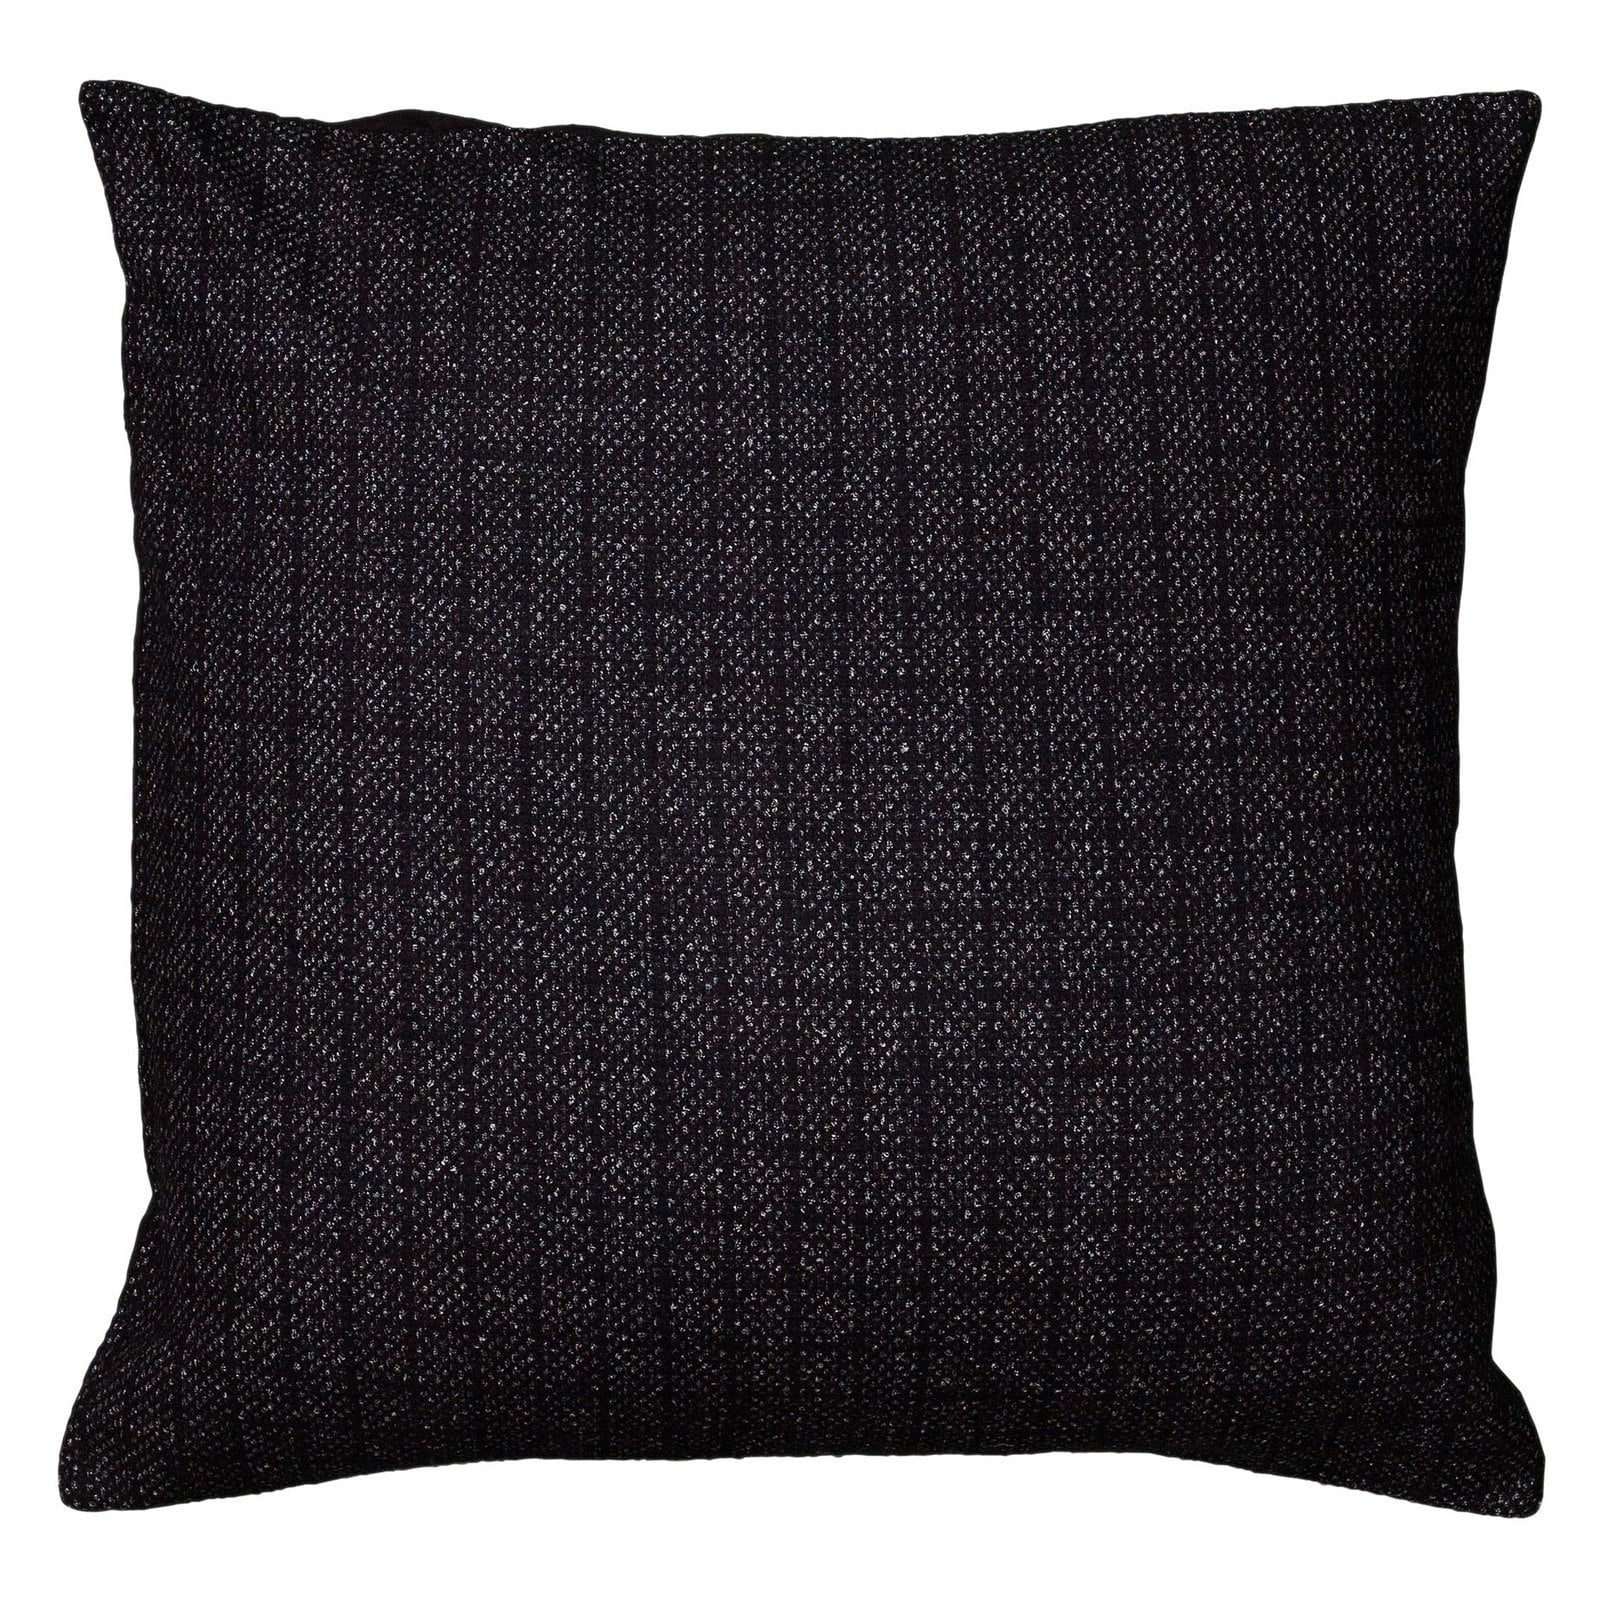 Rizzy Home Woven Textured Reversible Decorative Throw